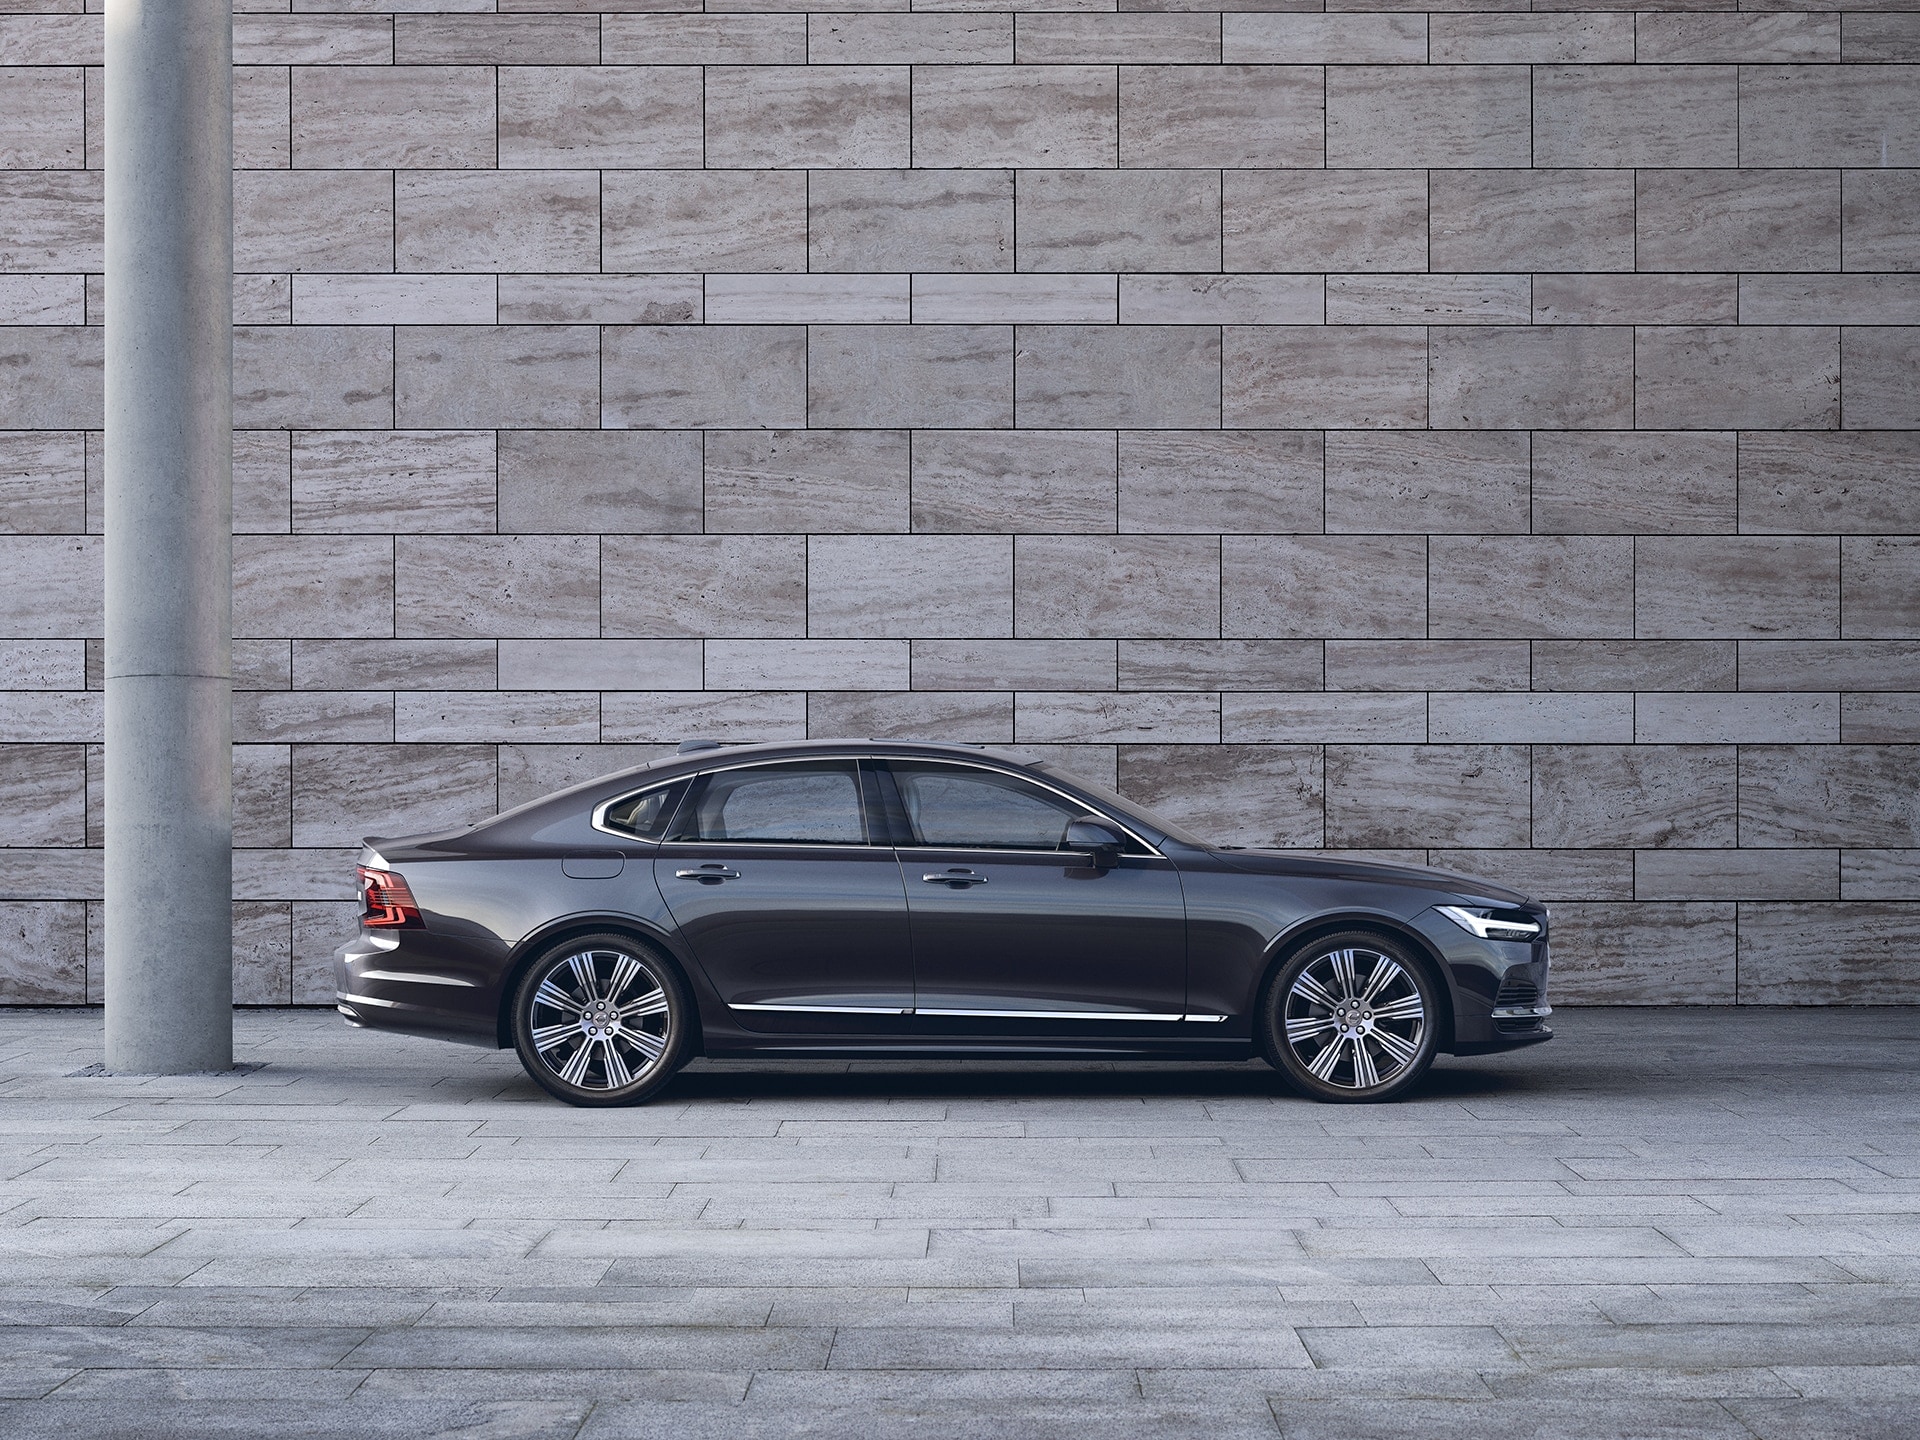 A dark Volvo S90 is parked in front of a grey wall.